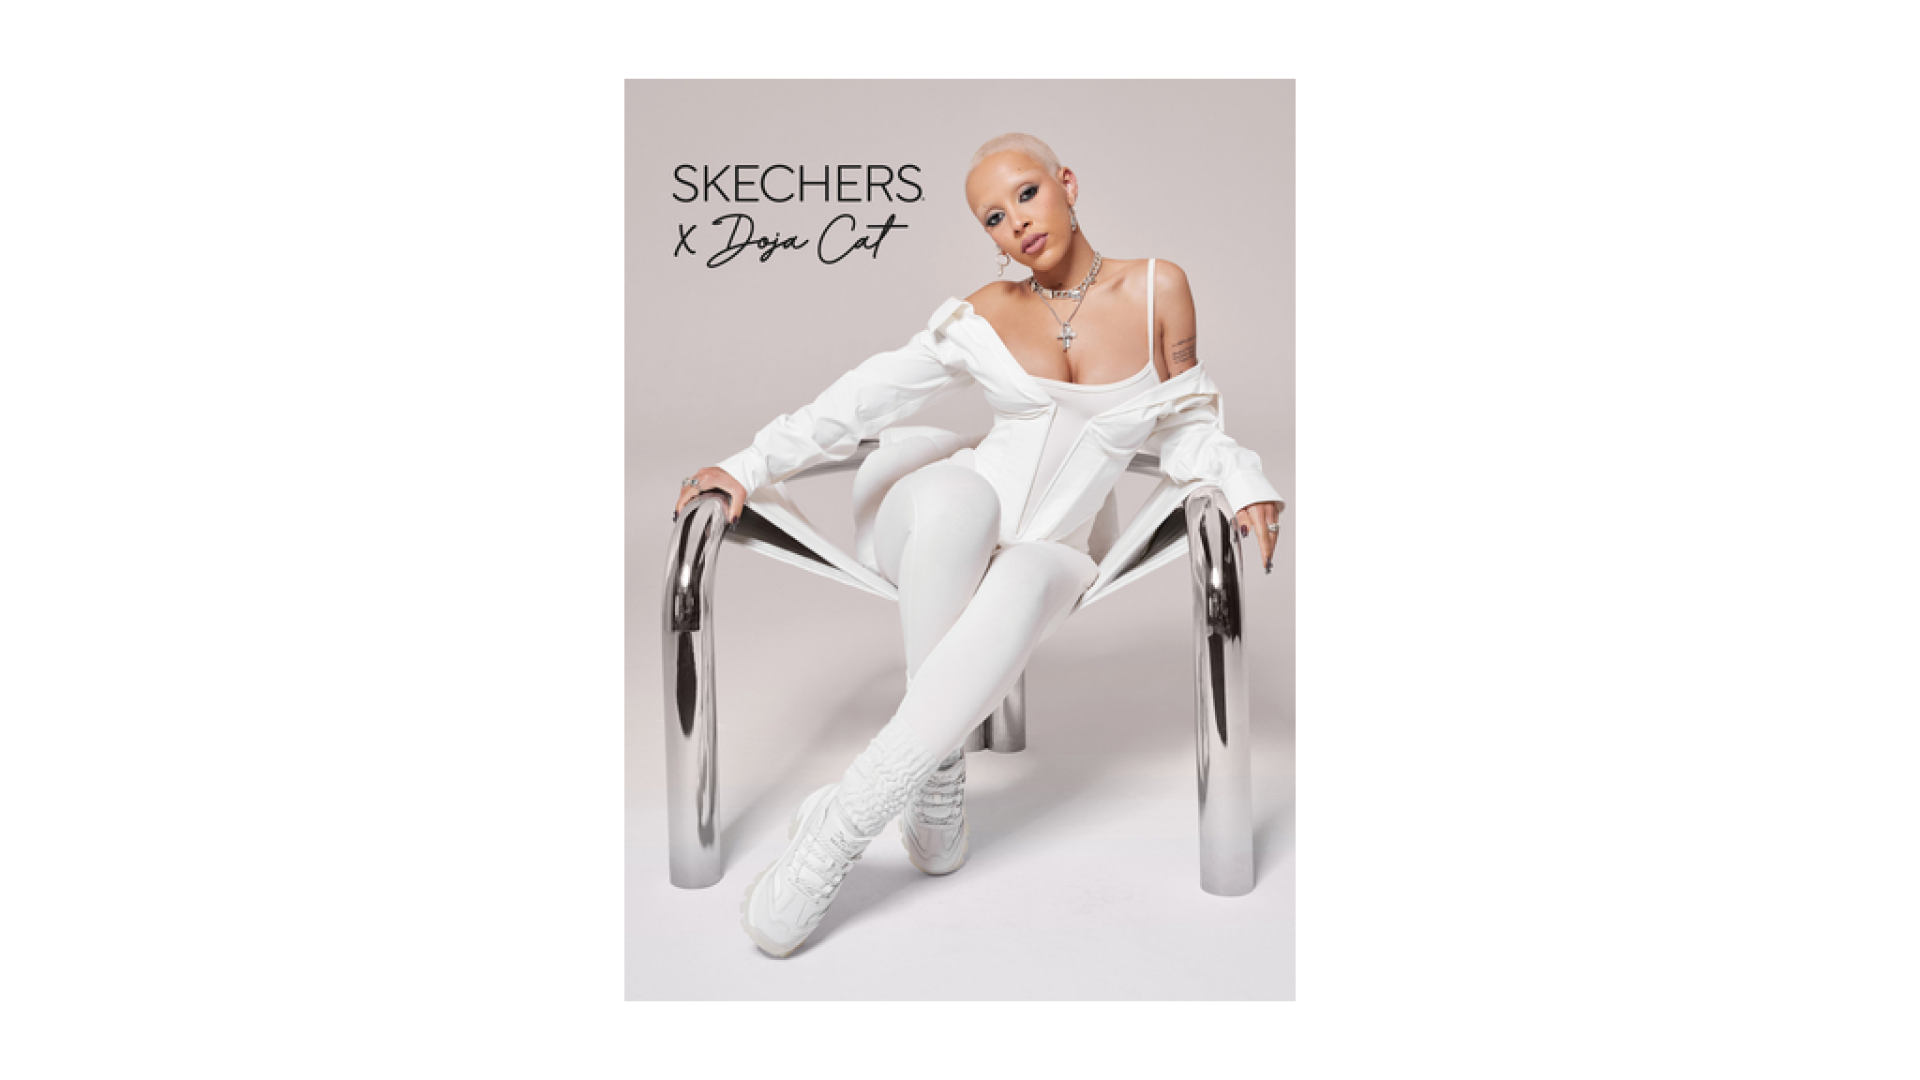 Doja Cat Drops New Skechers D'Lites Sneakers Collab: Where to Buy